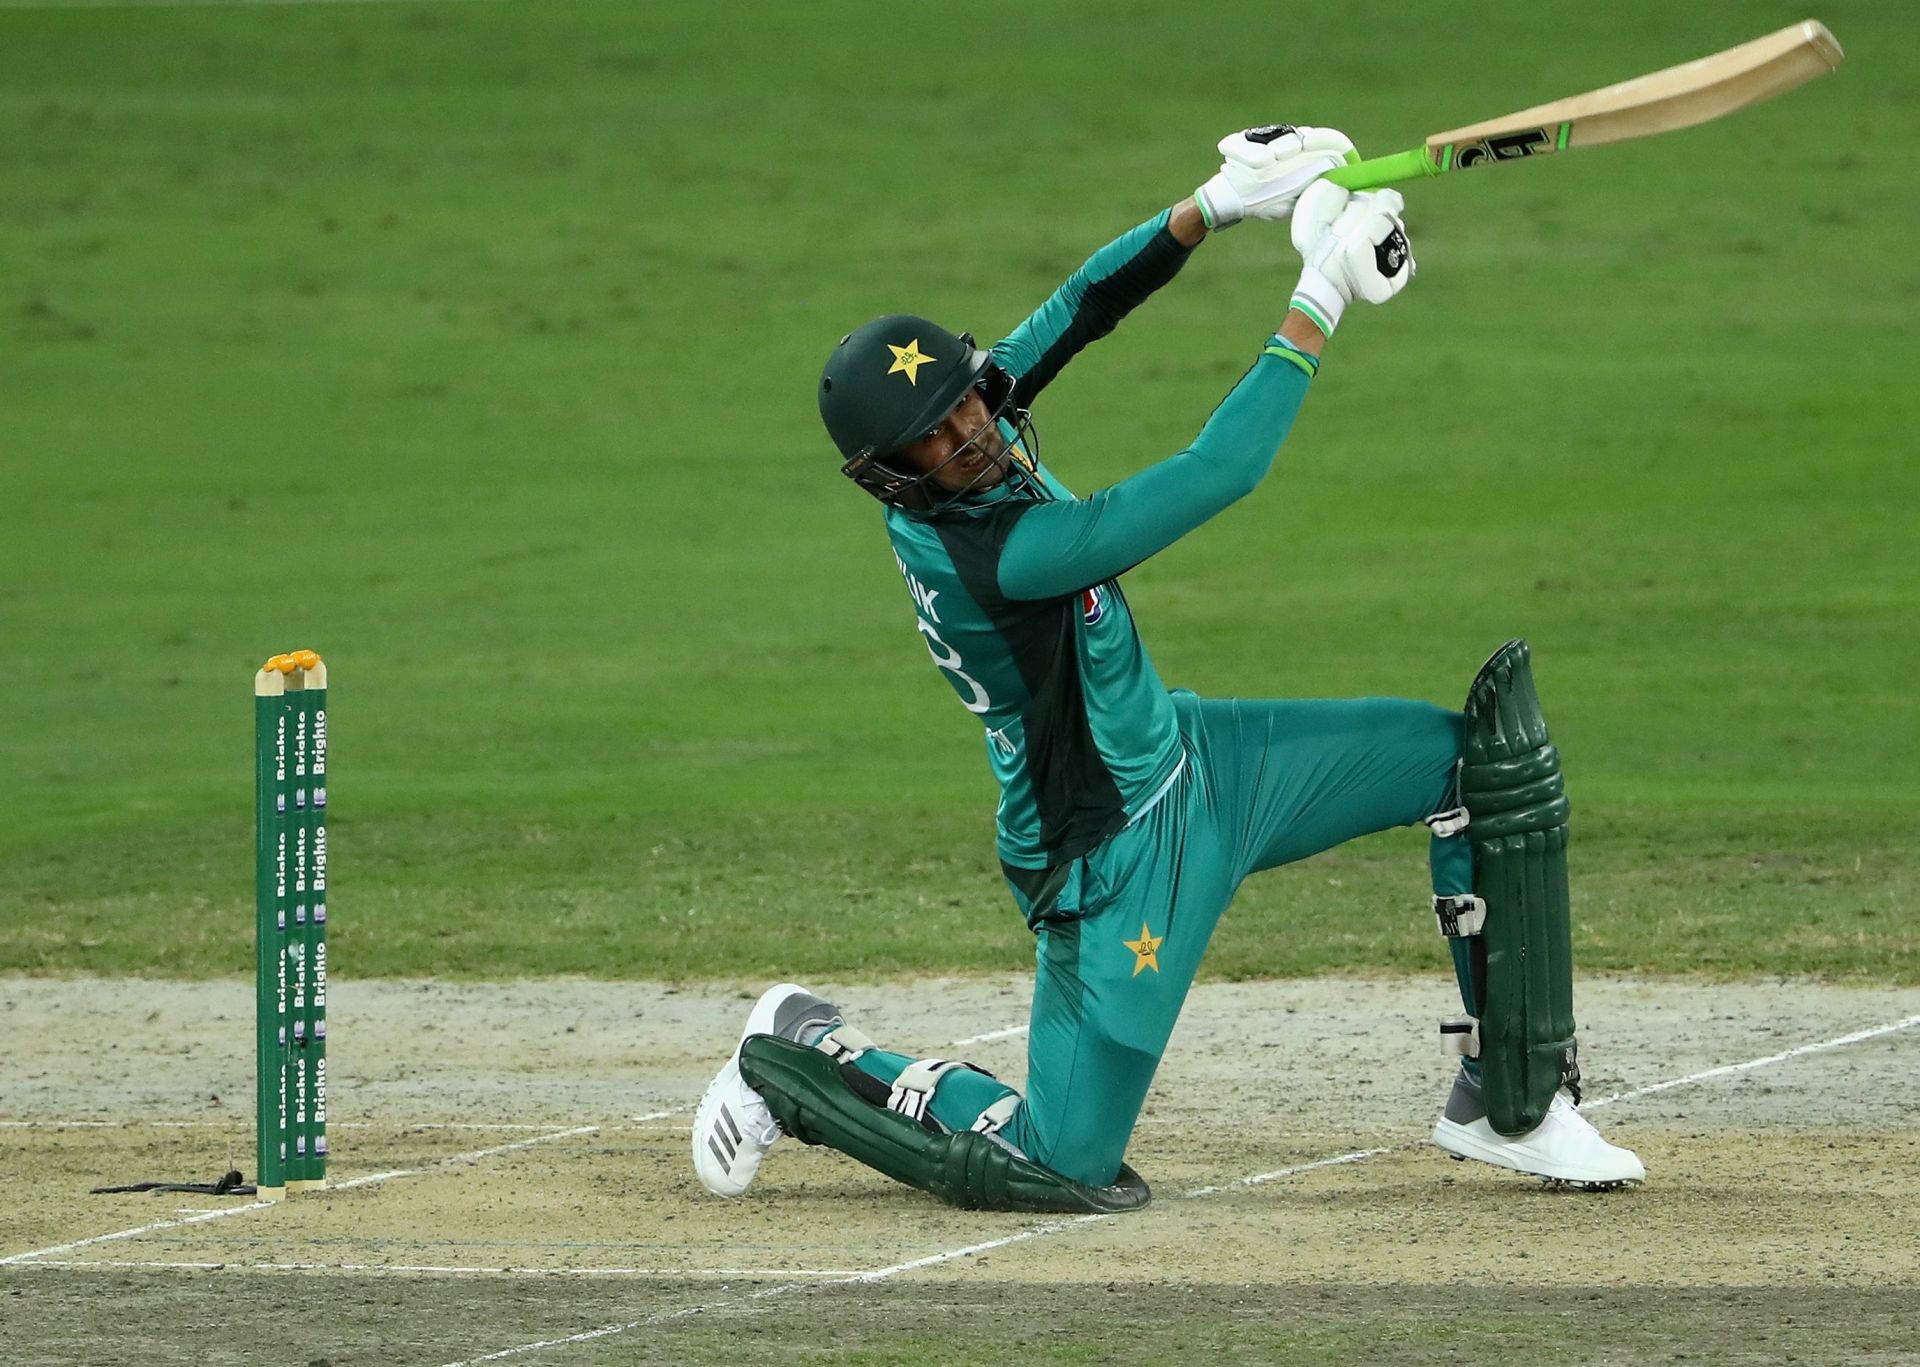 Shoiab Malik held his nerve and won the game for Pakistan